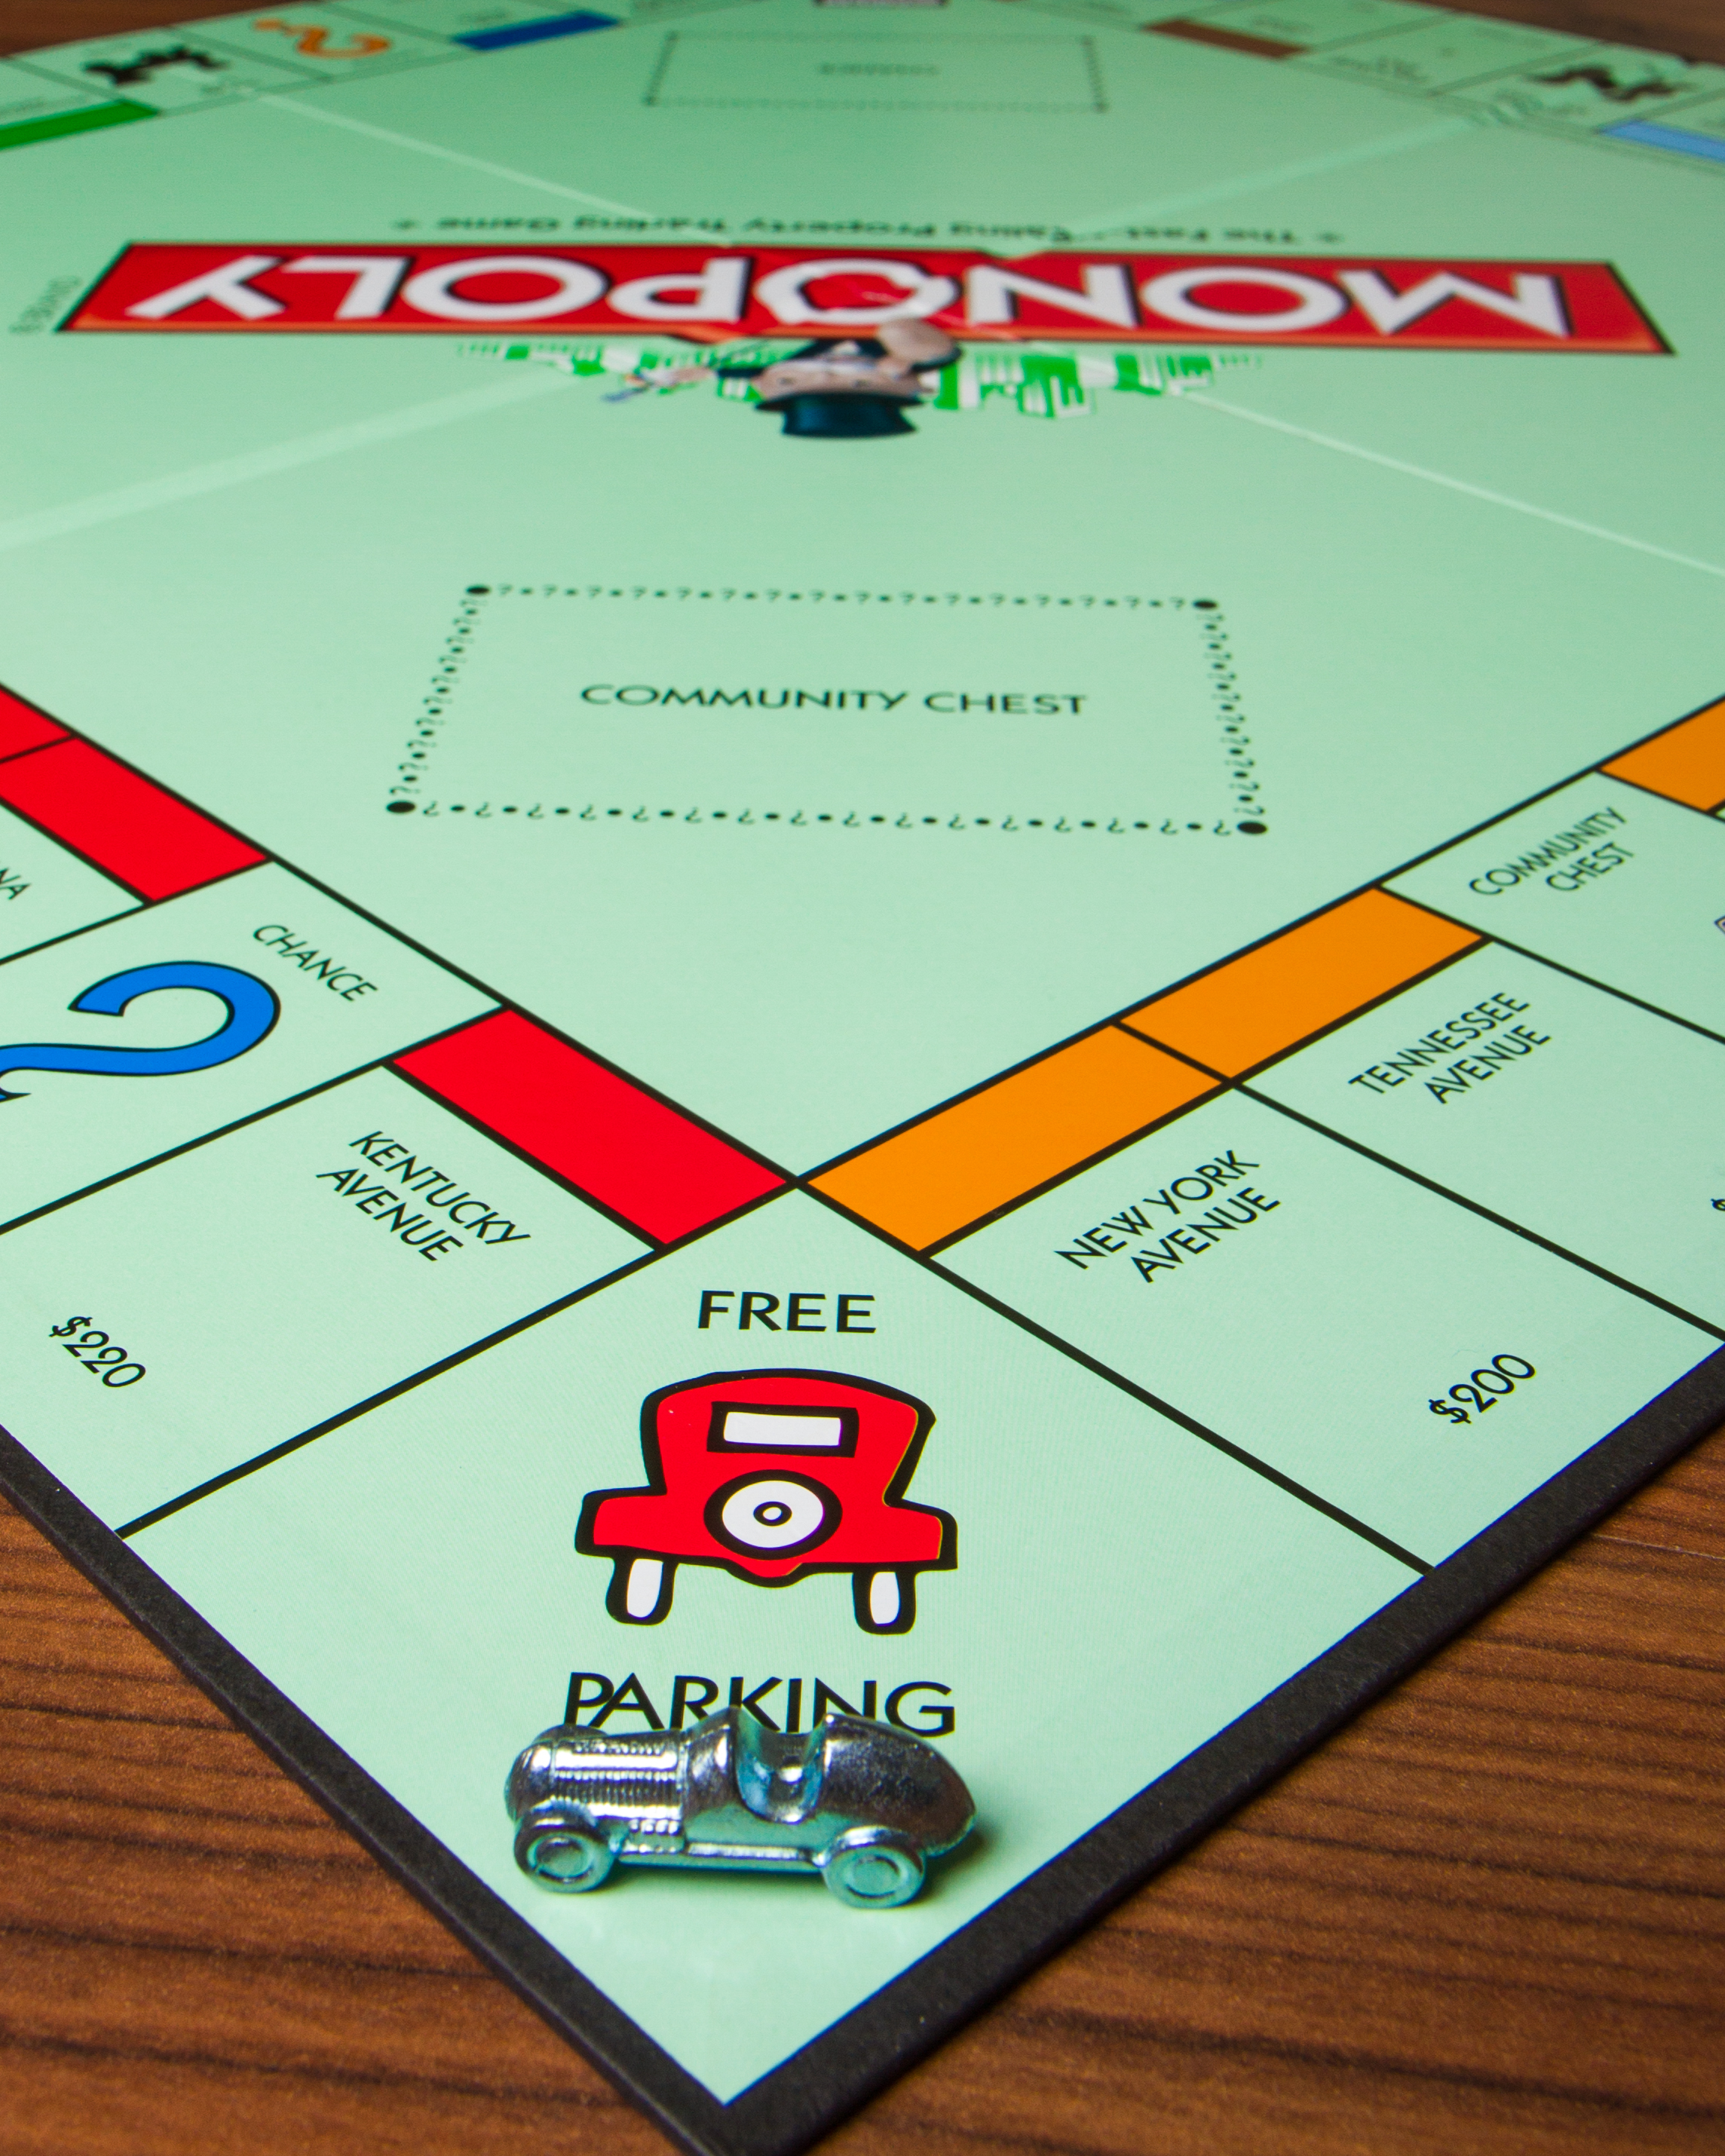 free monopoly game online